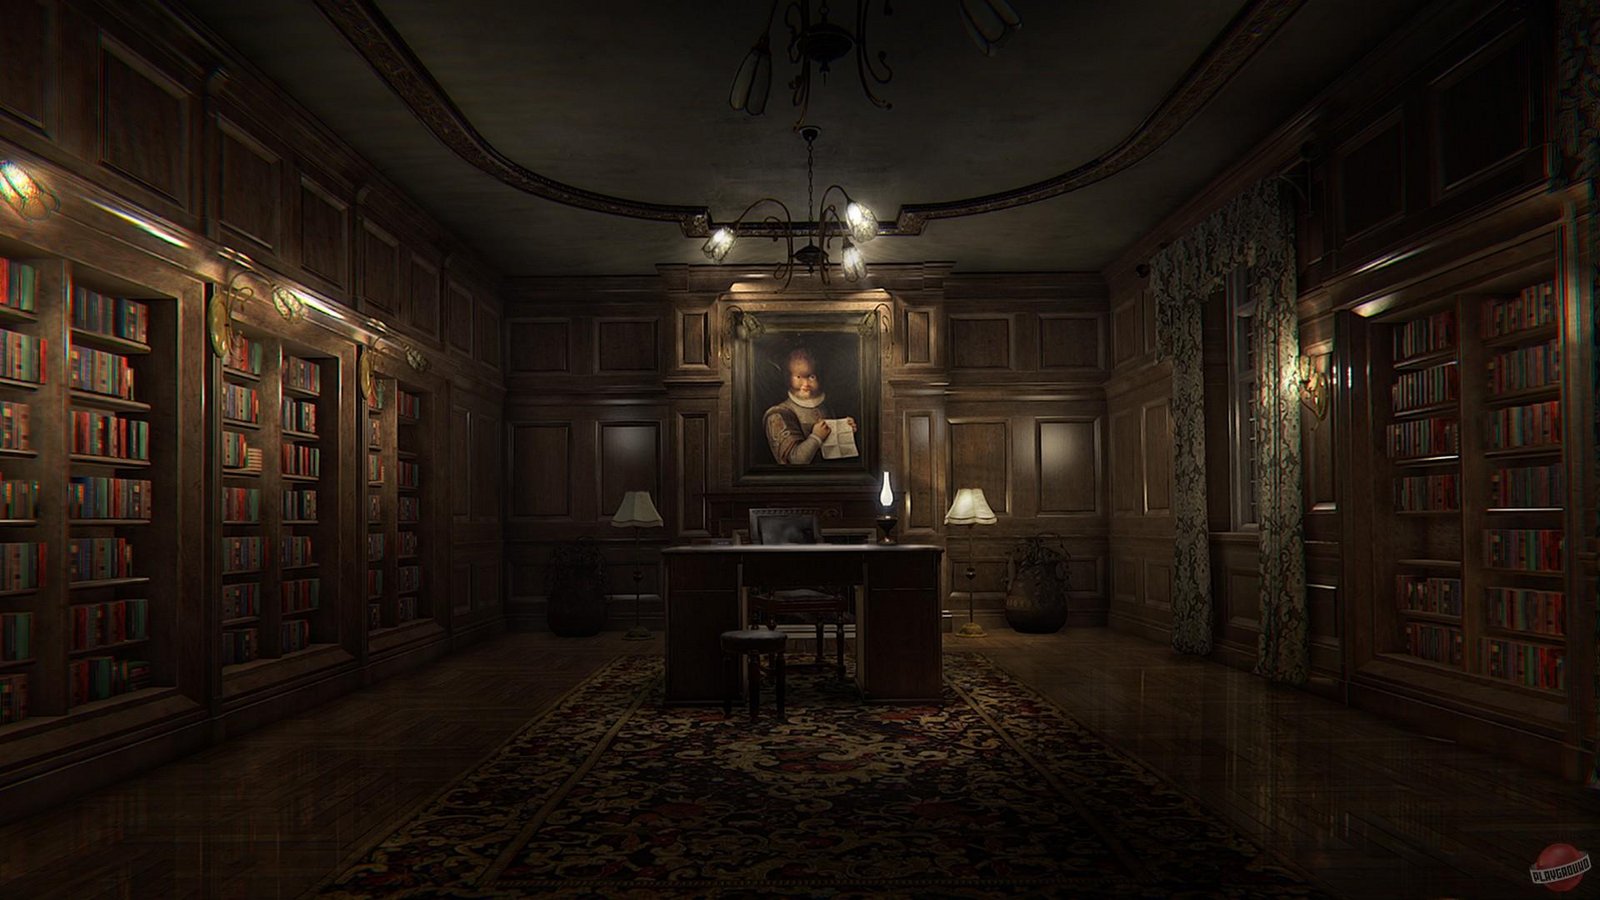 Layers of Fear VR